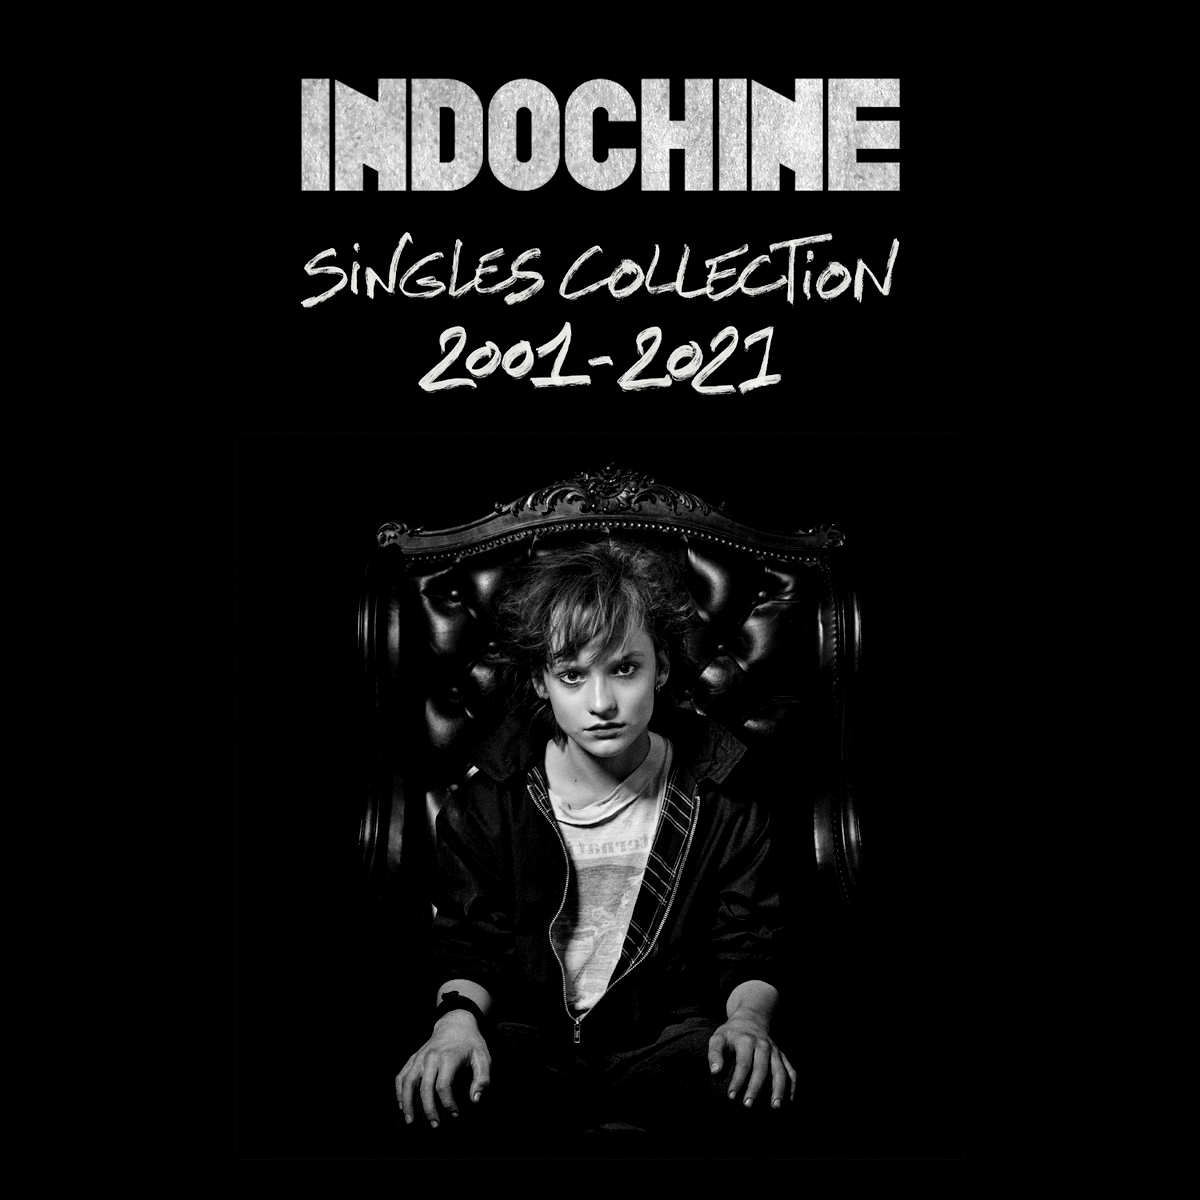 Indochine - Singles Collection (2001-2021) (2020) [FLAC 24bit/44,1kHz]